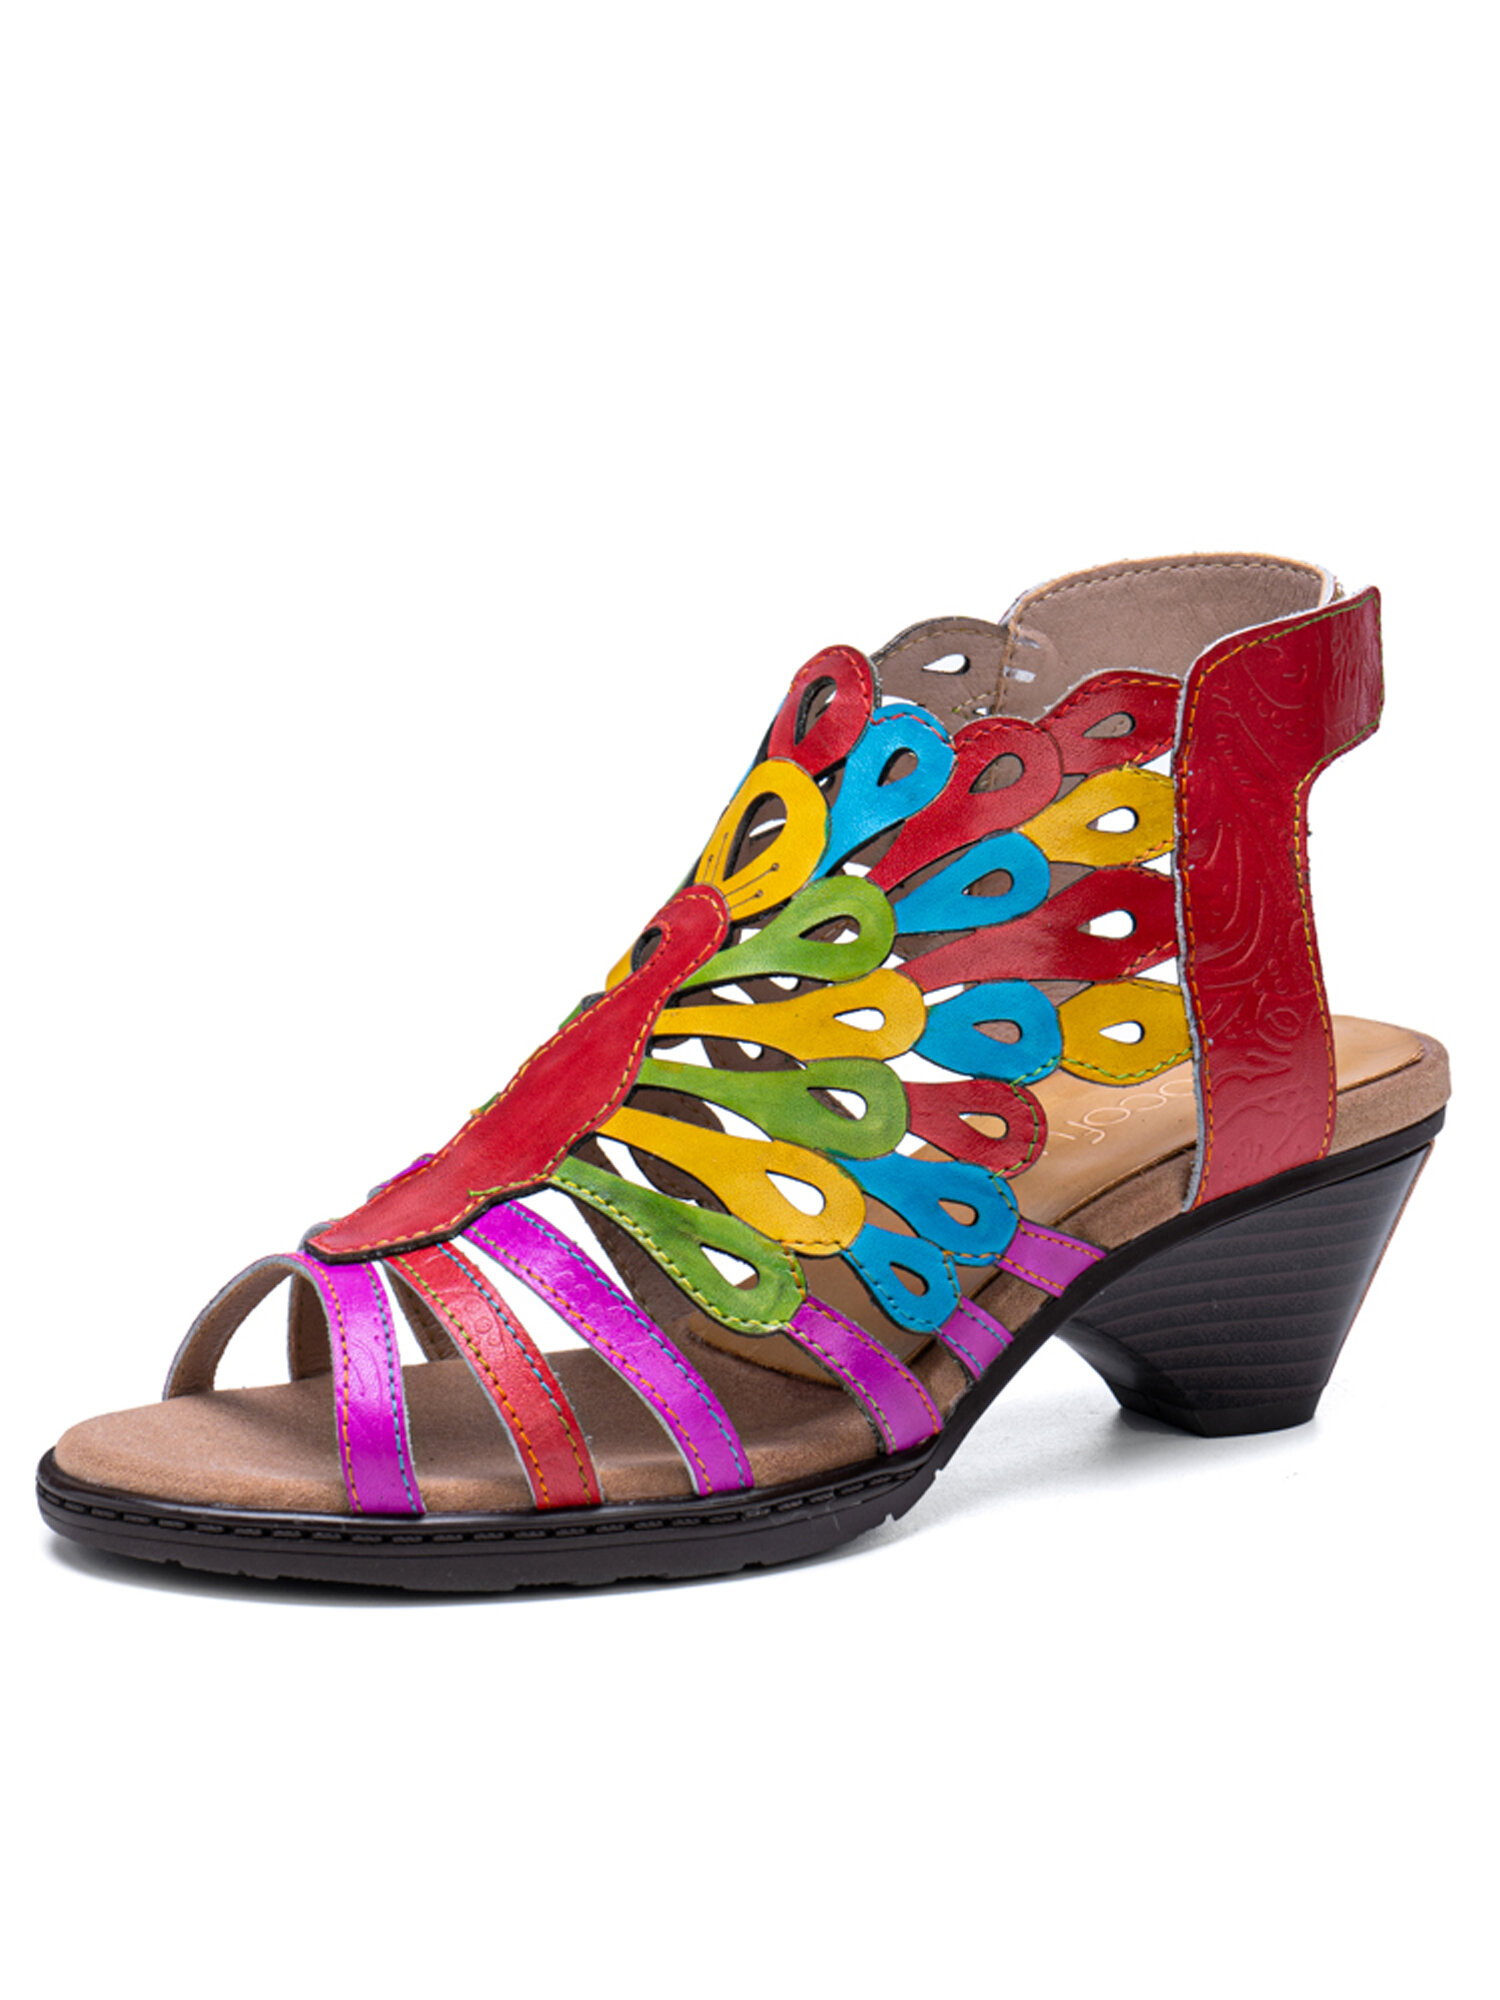 Socofy Genuine Leather Comfy Summer Vacation Bohemian Ethnic Colorblock Heeled Sandals